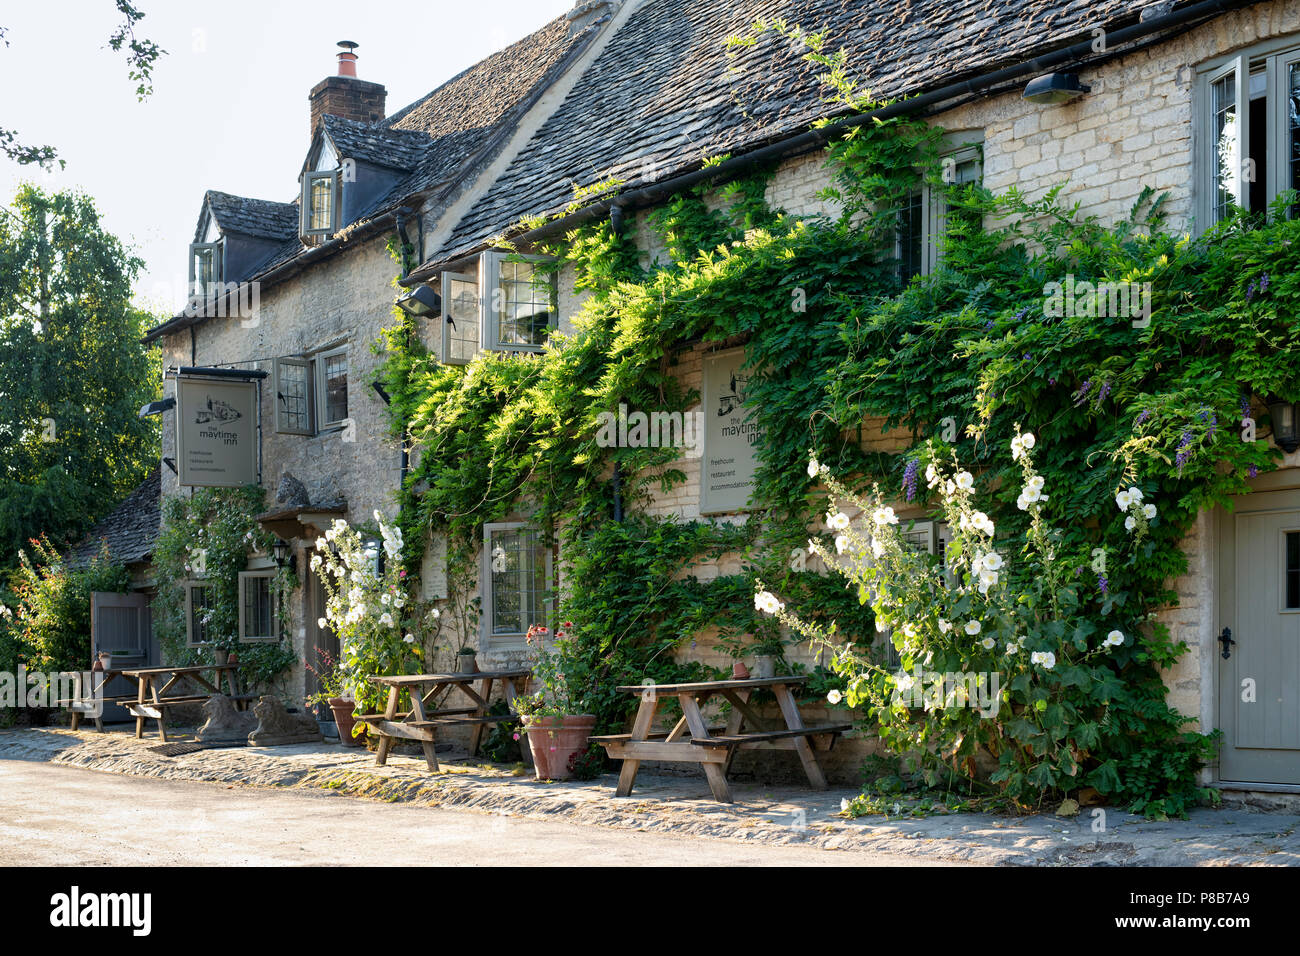 The Maytime Inn in the village of Asthall near Burford, Cotswolds, Oxfordshire, UK Stock Photo